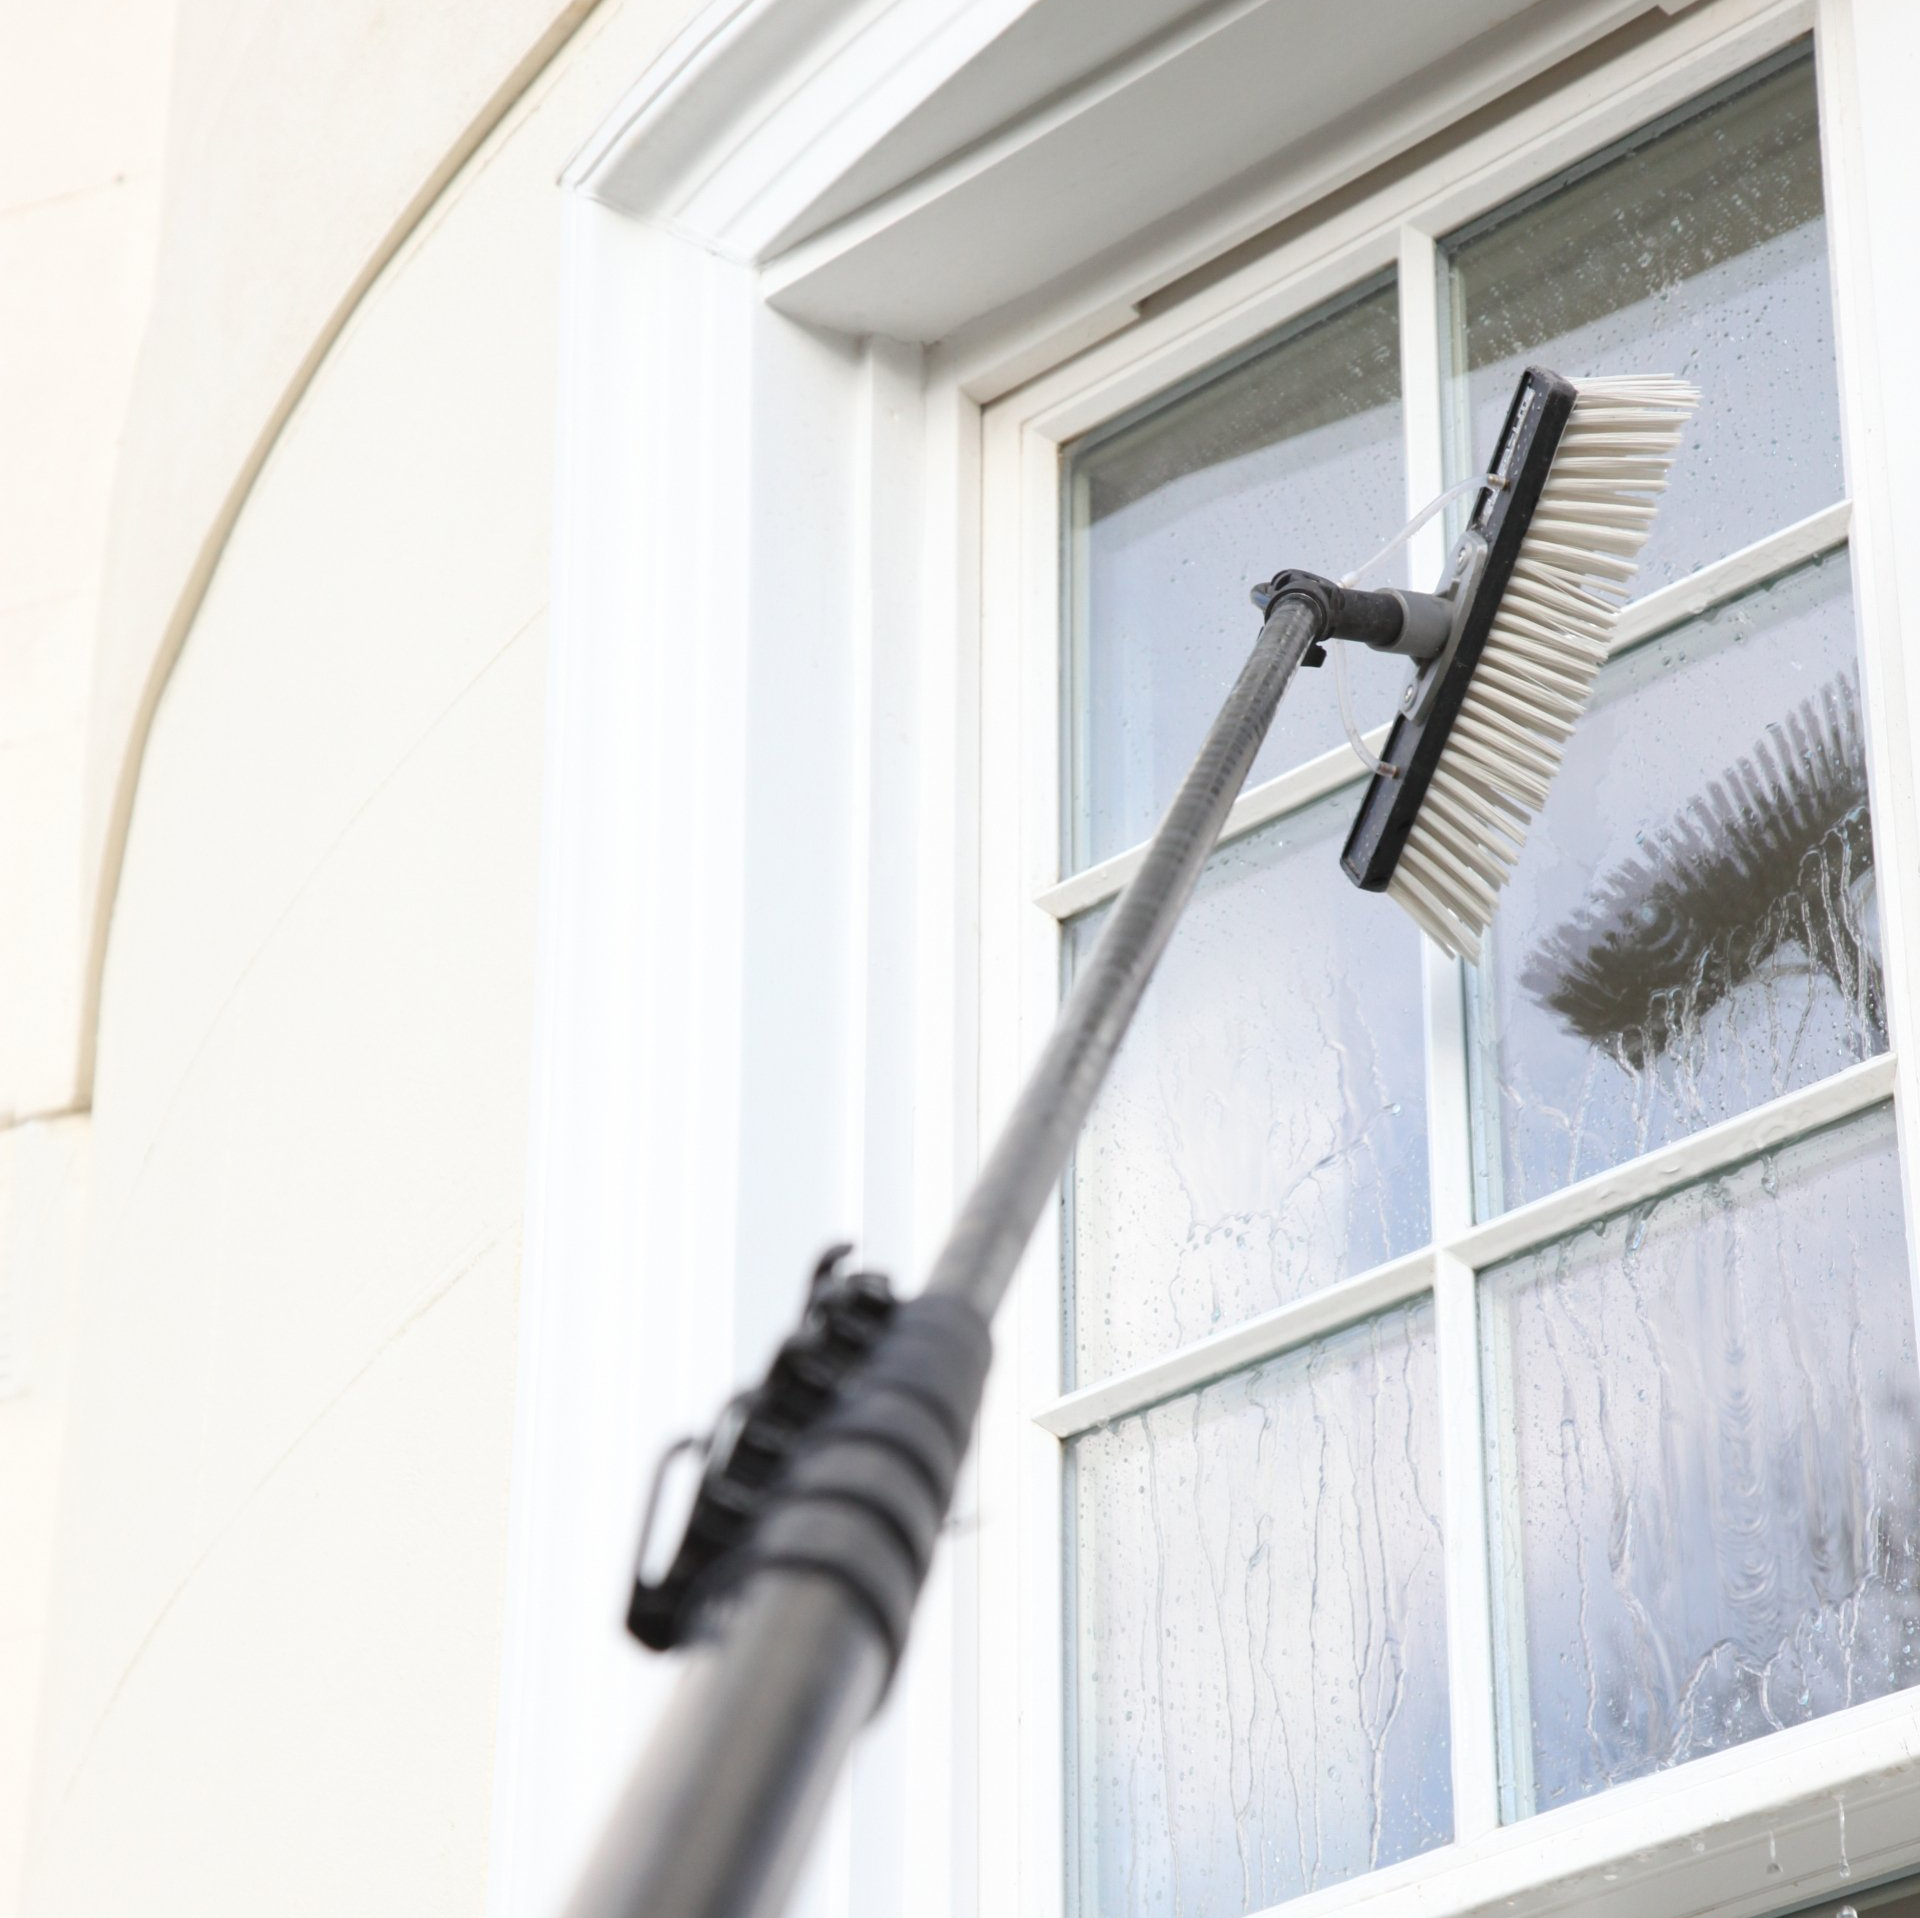 Window cleaning using the water fed pole system, also called reach and wash.